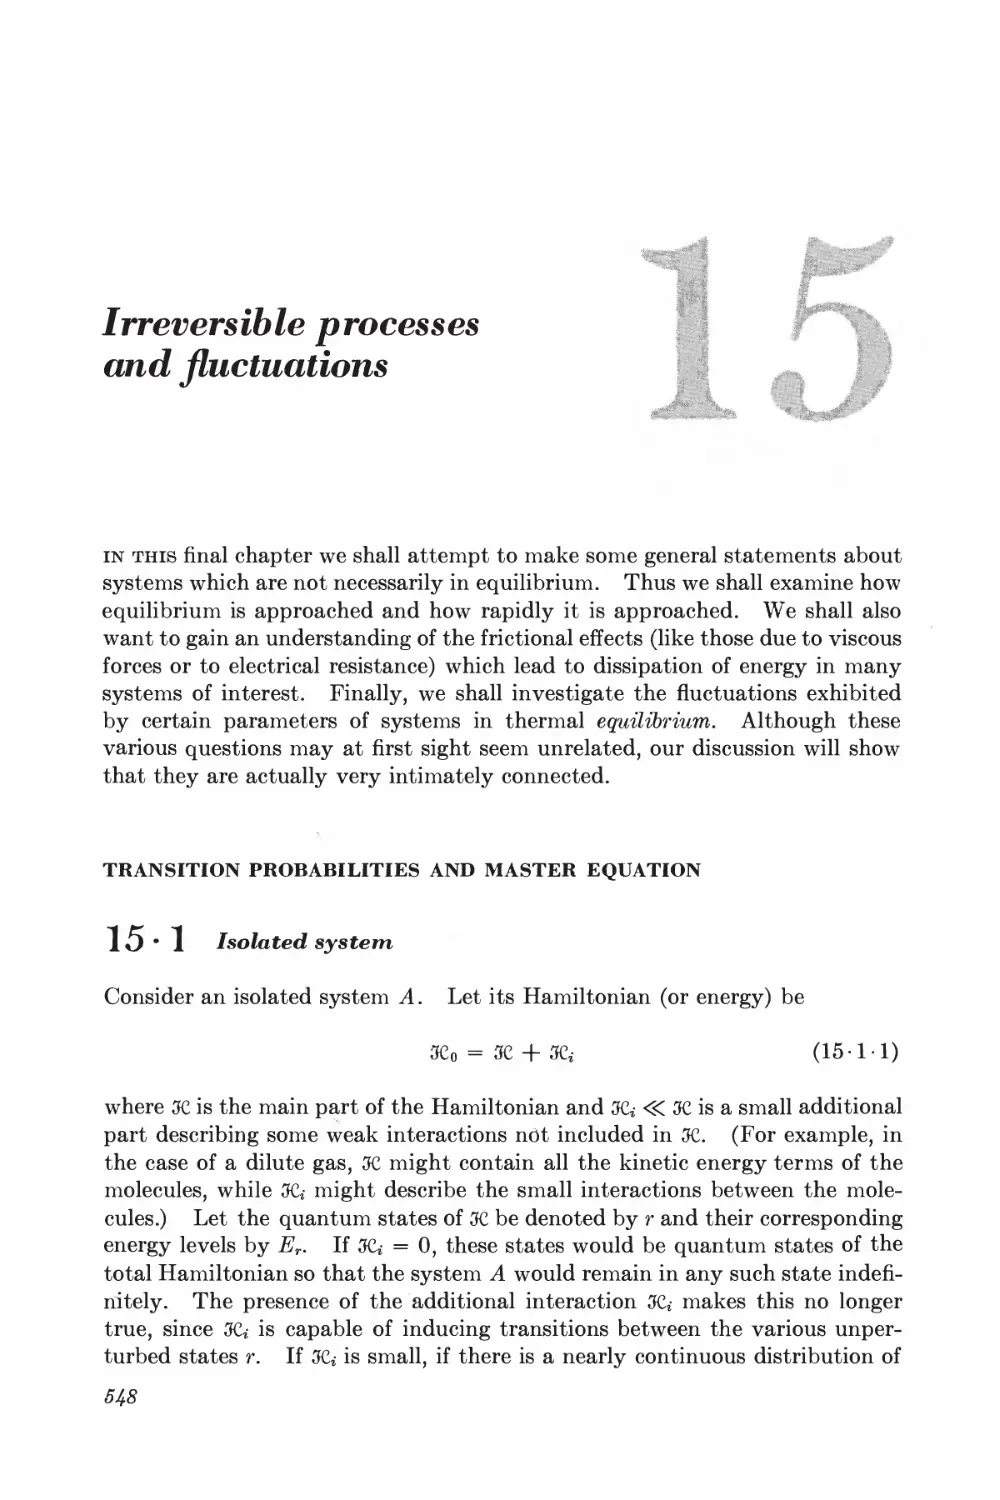 Chapter 15: Irreversible Processes and Fluctuations